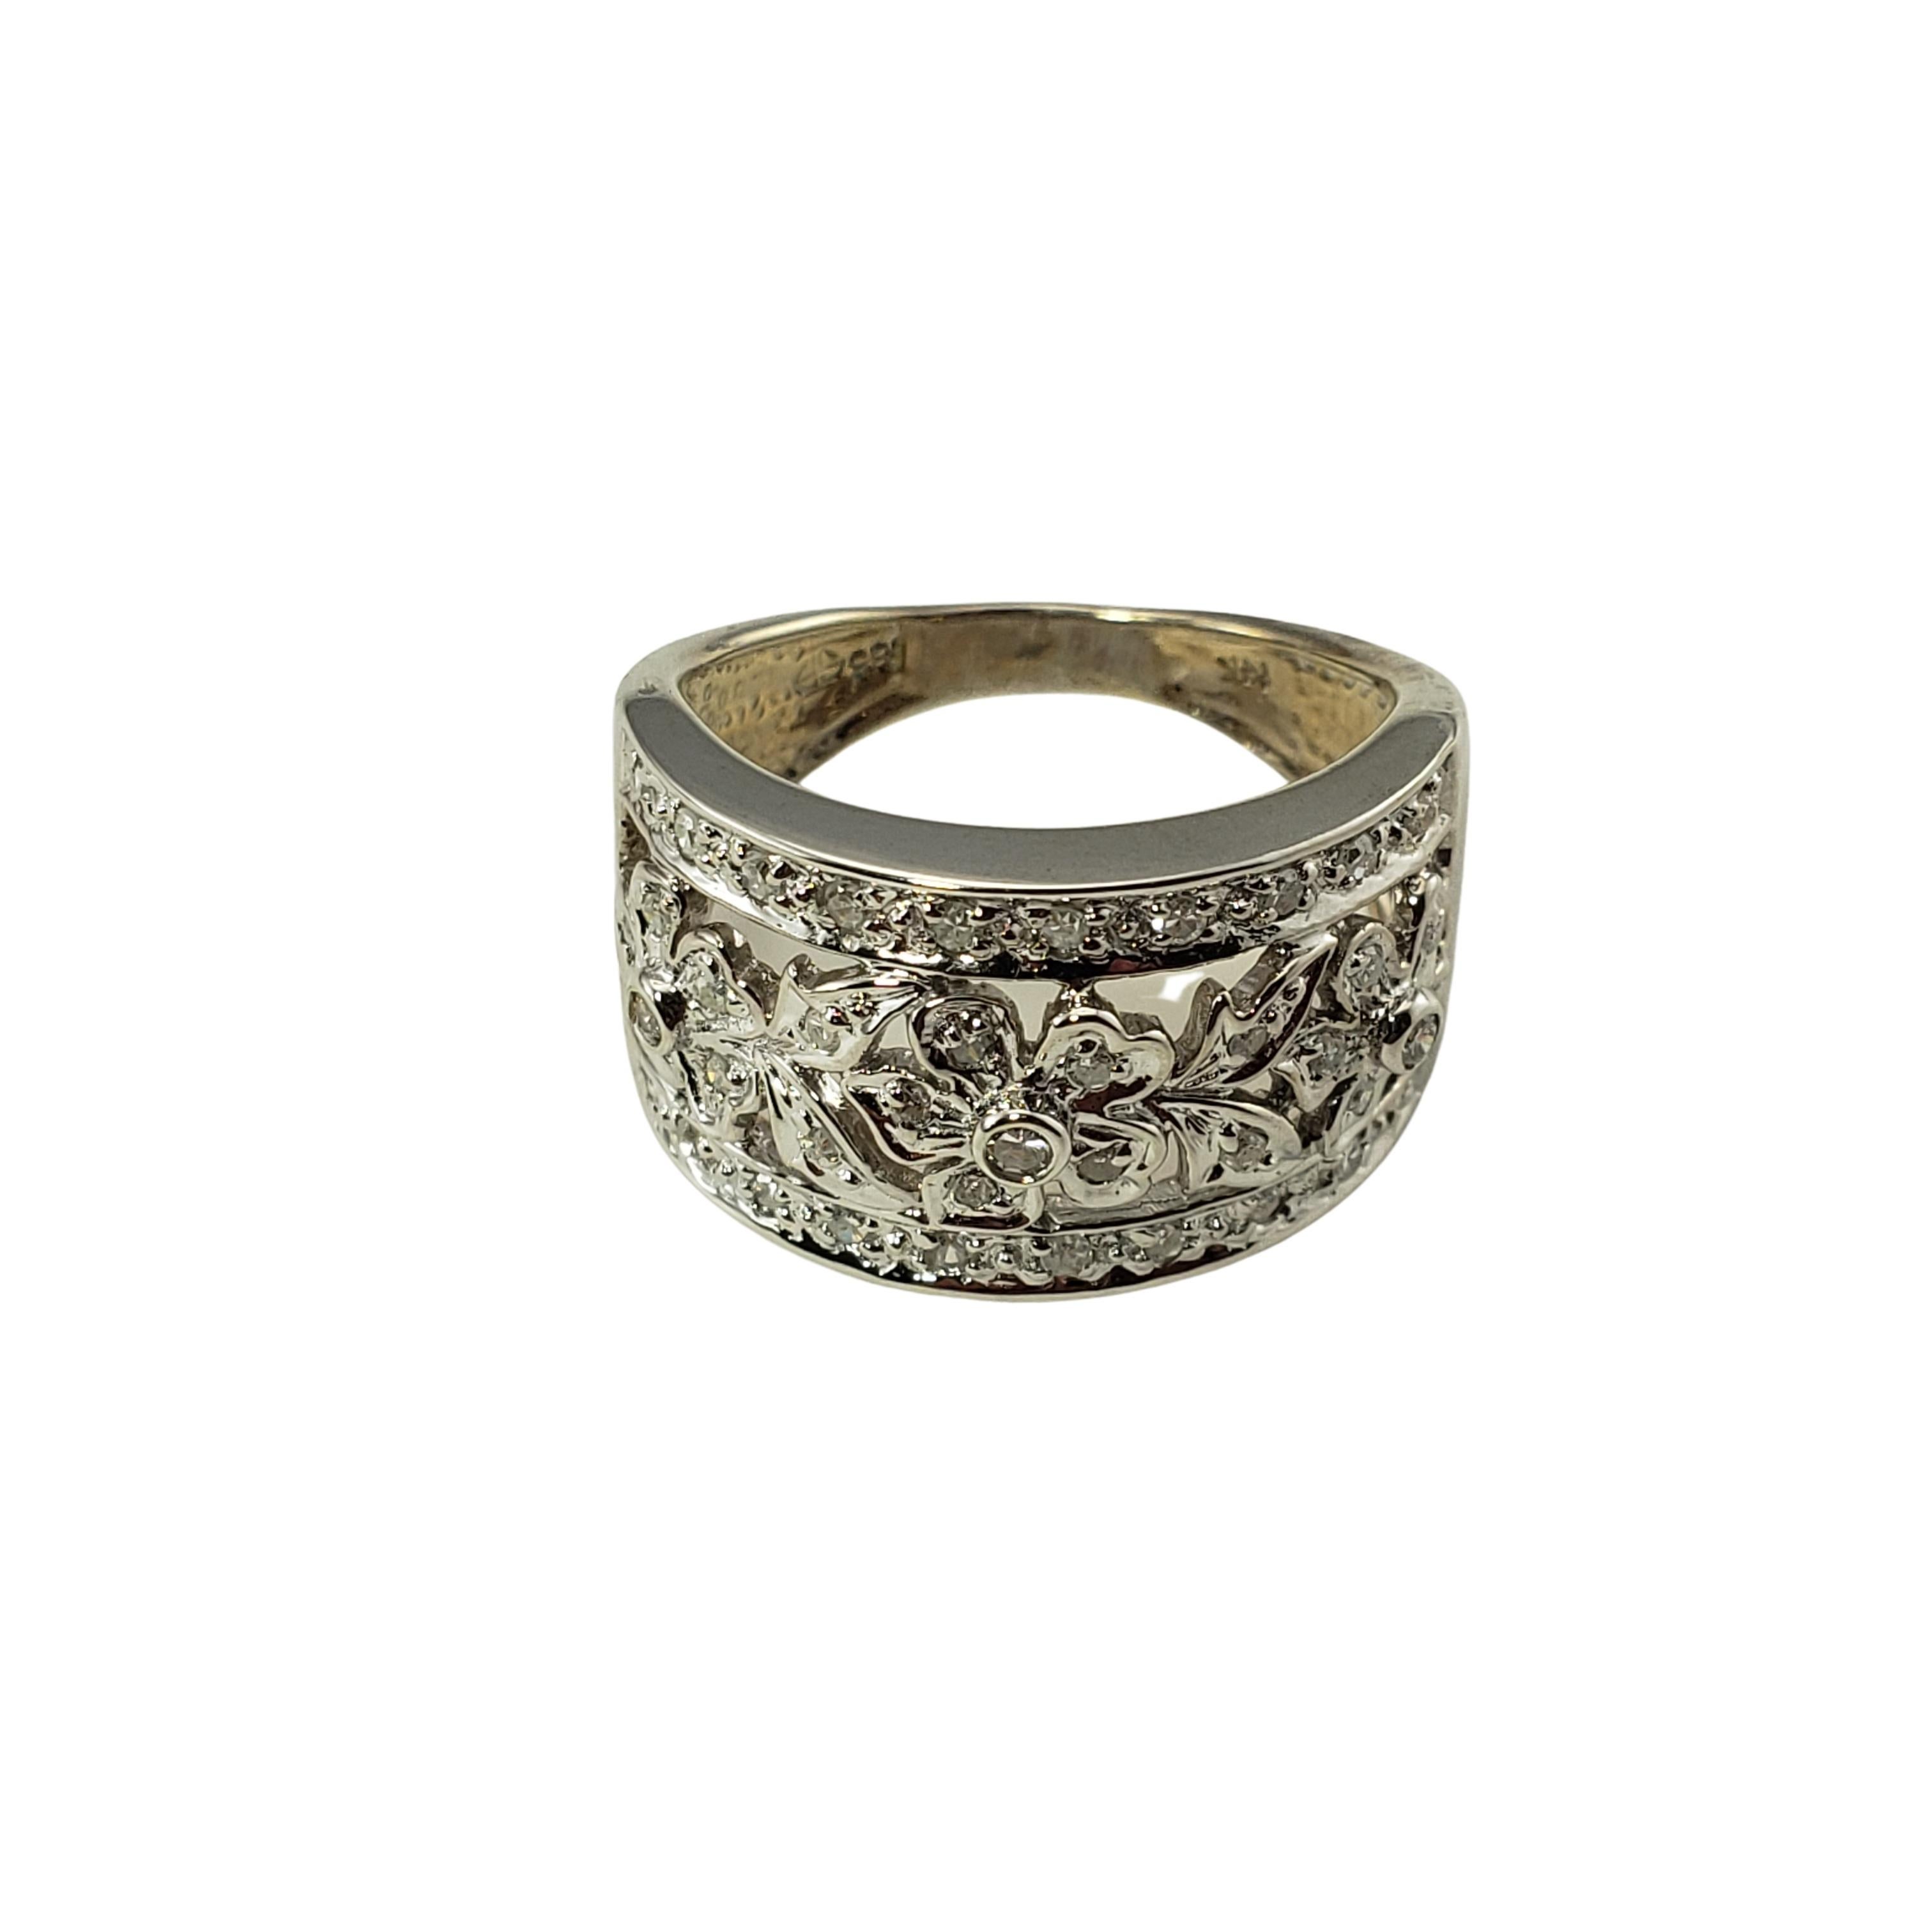 14 Karat White Gold Floral Diamond Ring Size 5.5-

This sparkling floral band features 42 round single cut diamonds set in beautifully detailed 14K white gold.  Width:  12 mm.
Shank:  3 mm.

Approximate total diamond weight:  .45 ct.

Diamond color: